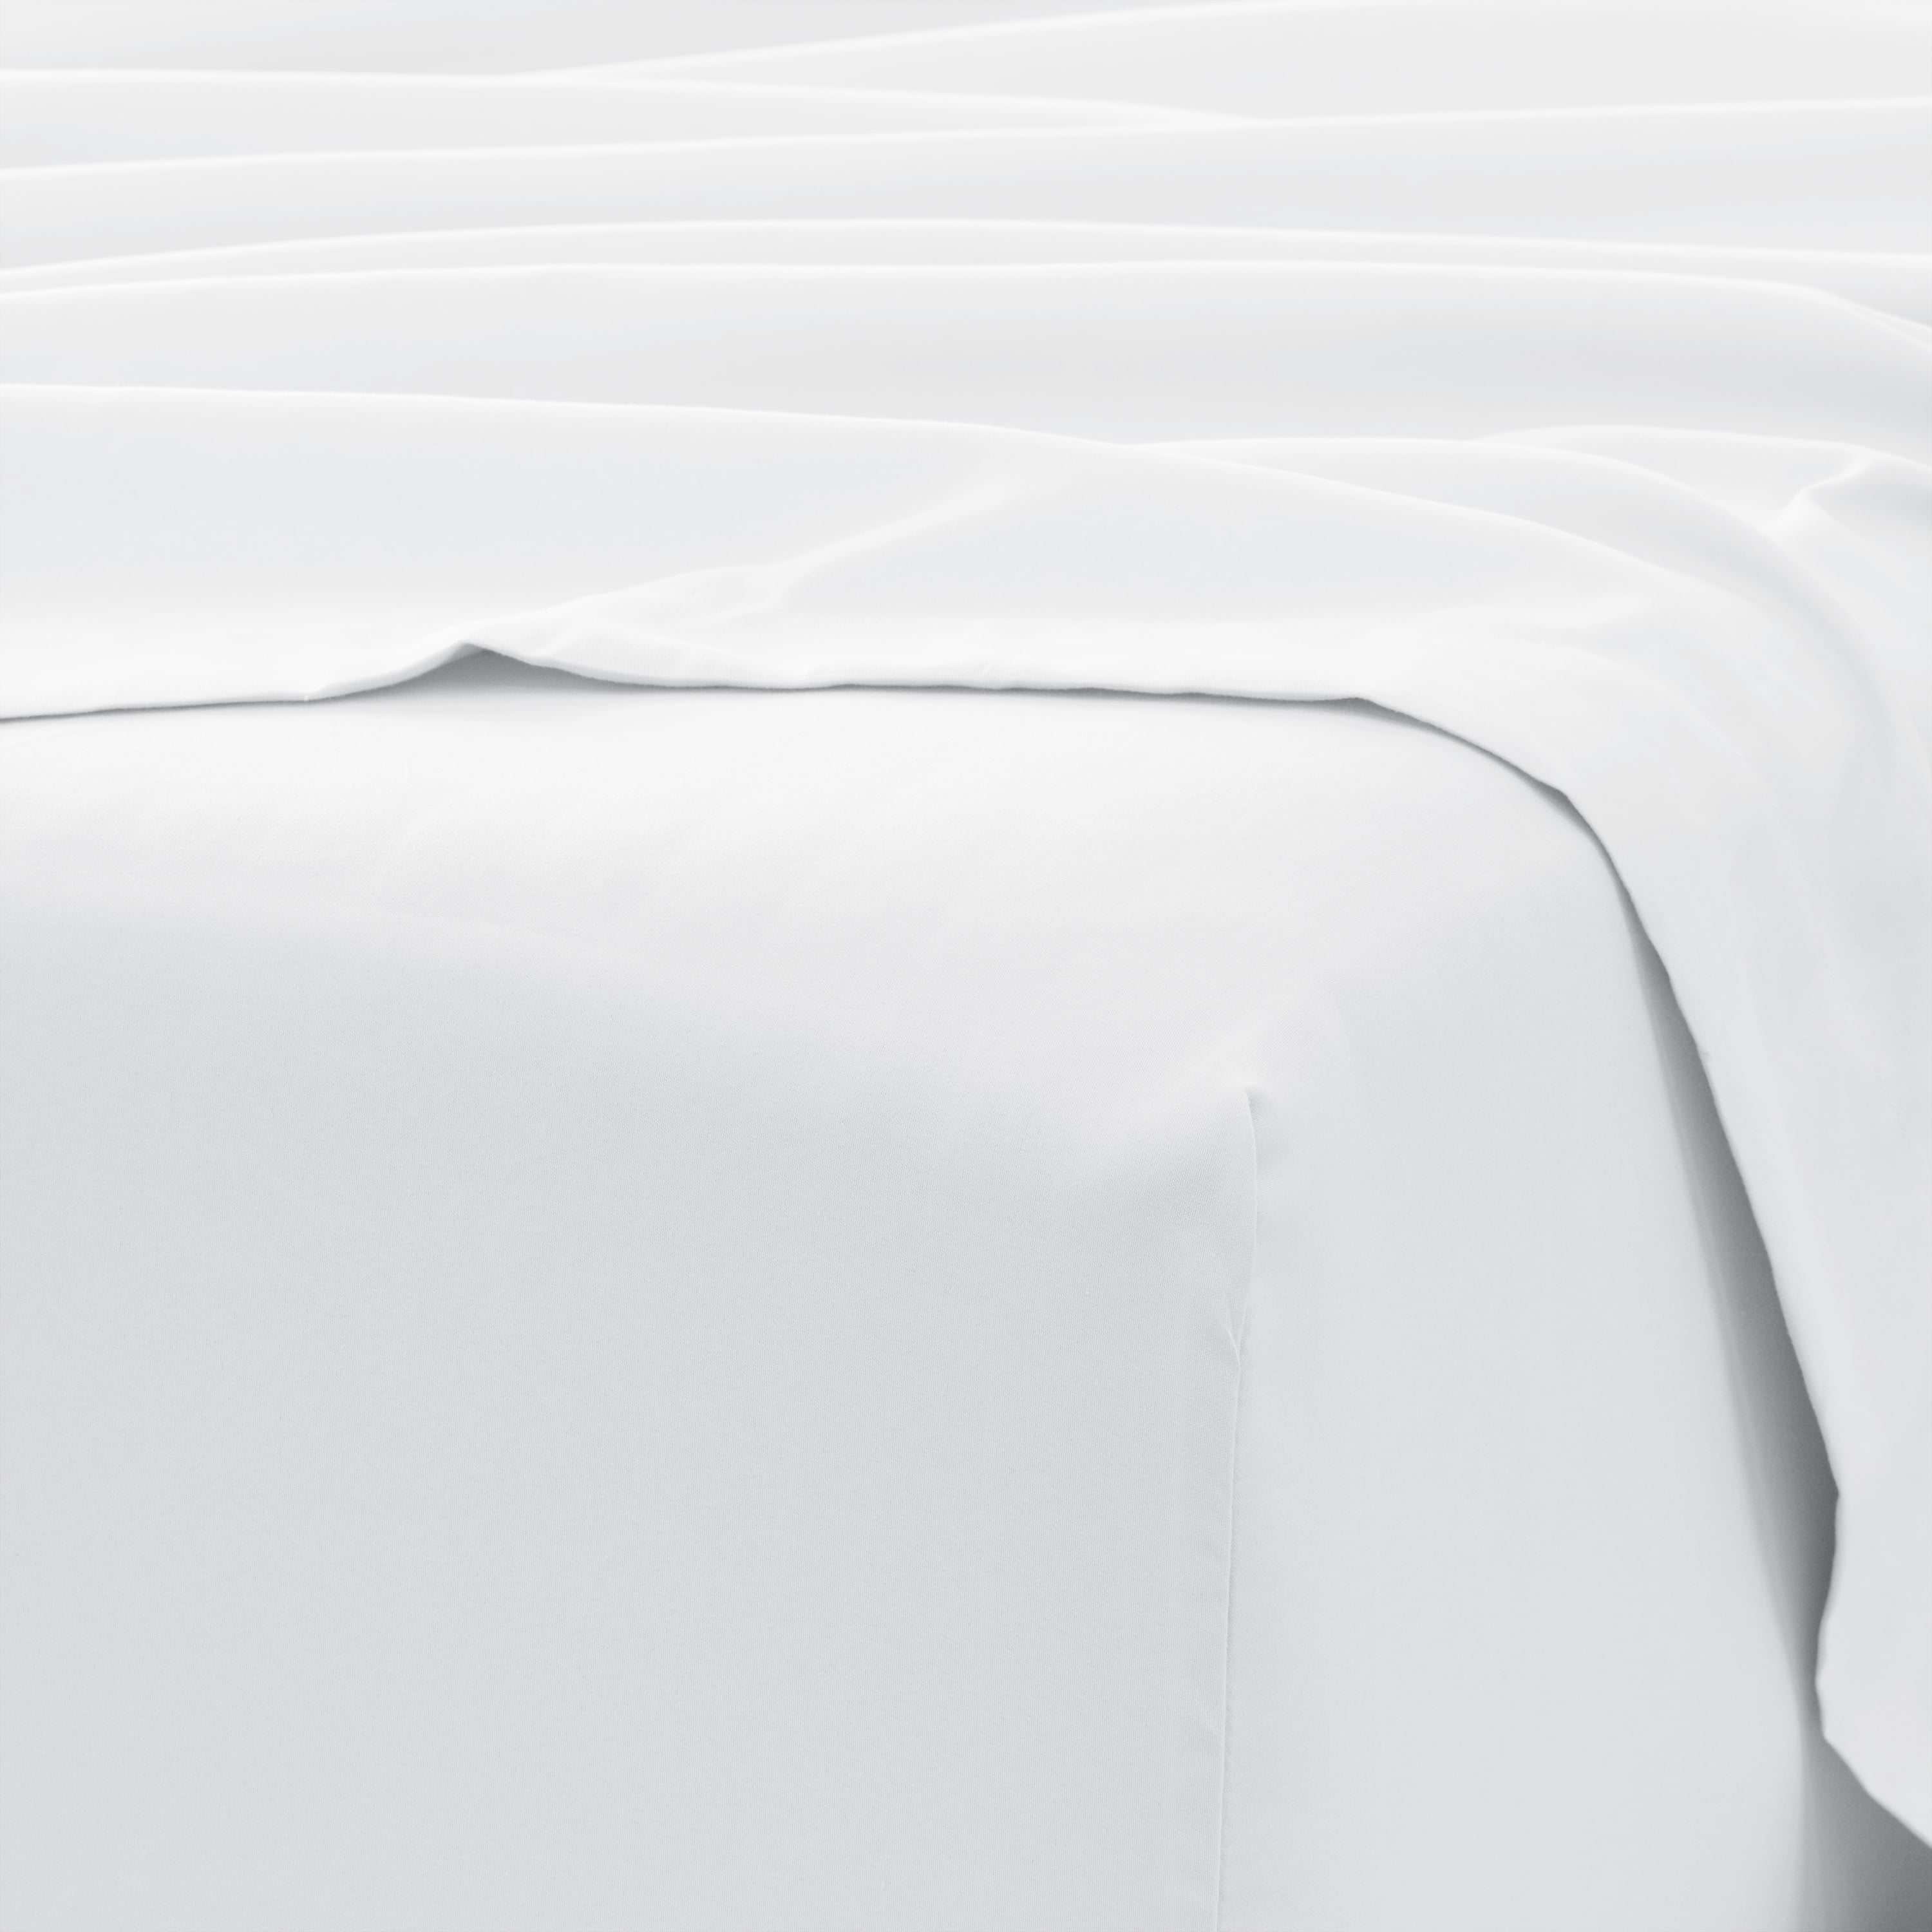  Better Bedder Bed Headband, Fabric Shell of Cotton, Polyester,  and Spandex, Bed Making Made Easy, Transforms Any Flat Sheet into A Fitted  Sheet, Fits All Mattress Heights- King 76” X 80” 